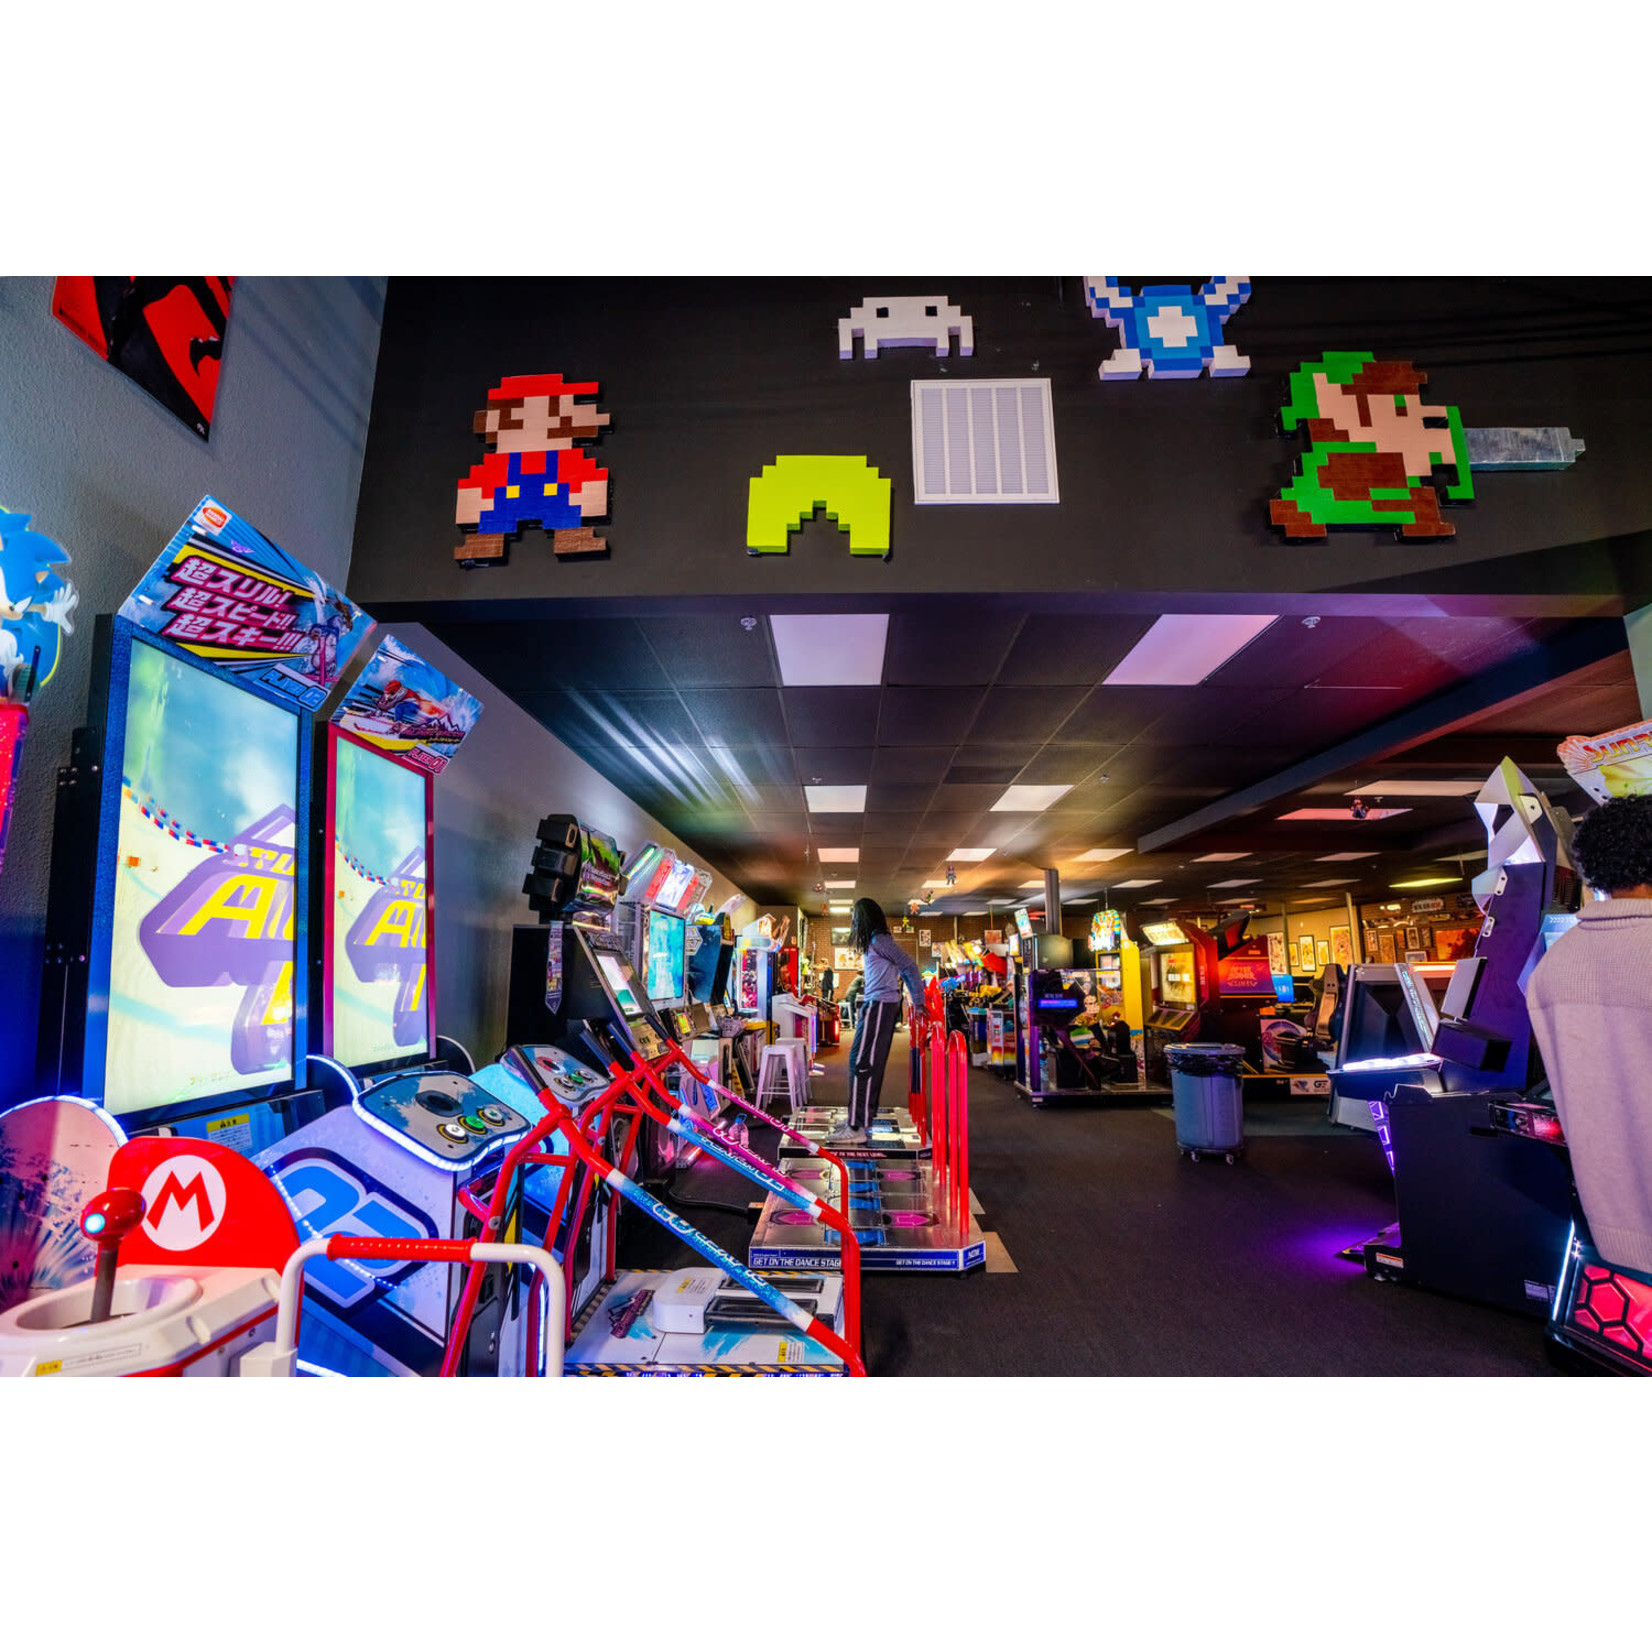 Game Nest Arcade Game Nest Arcade - $10 value good for ONE HOUR unlimited game card